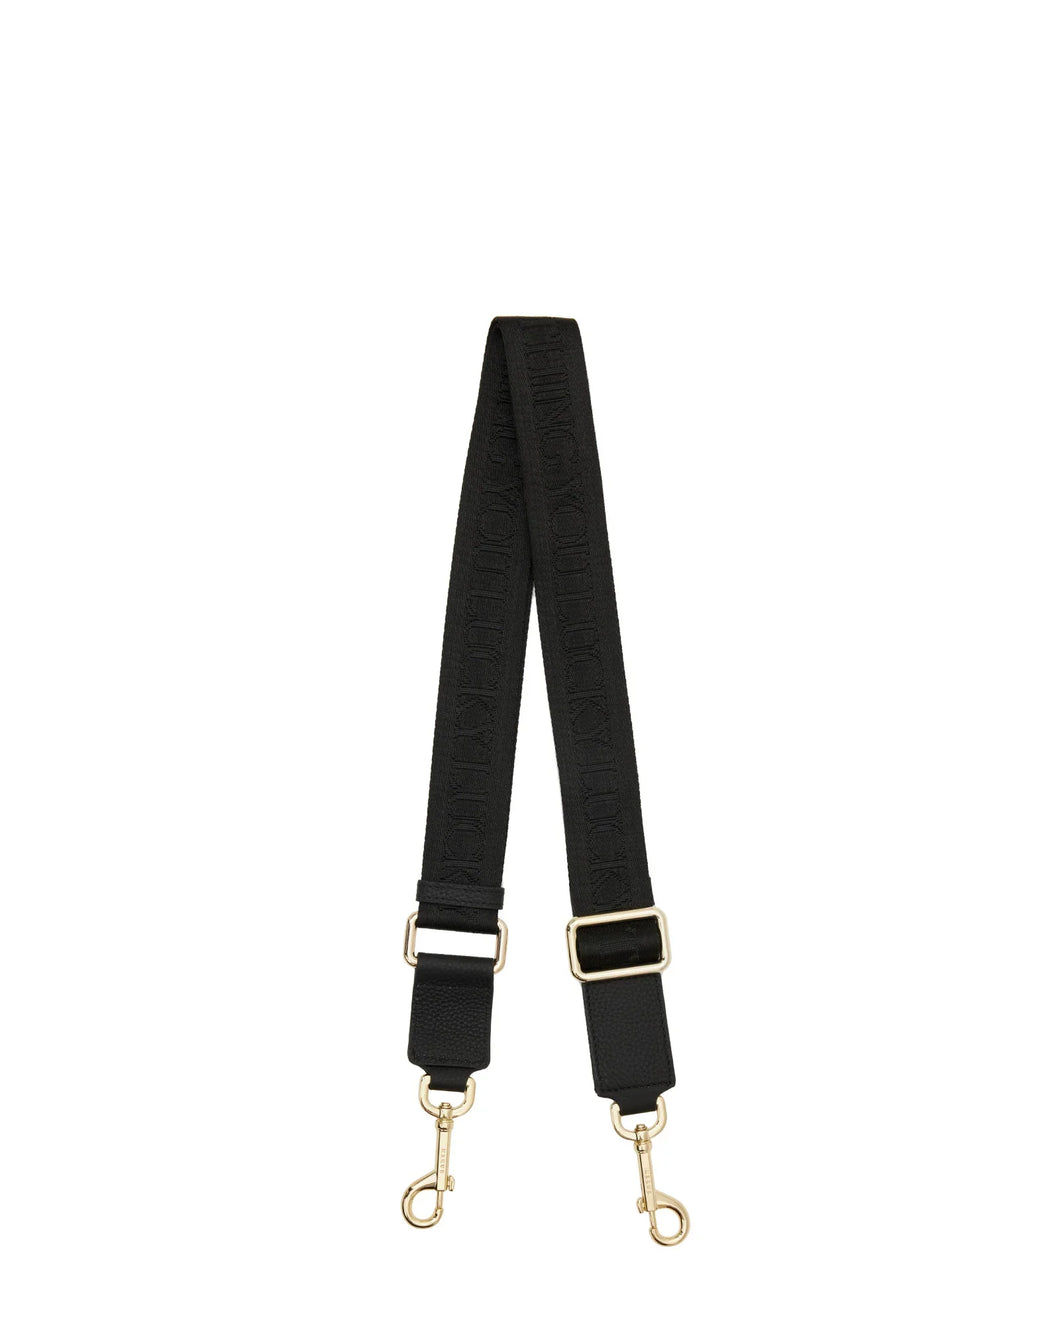 SABEN Feature Strap - Black Lucky Thing  Hyde Boutique   